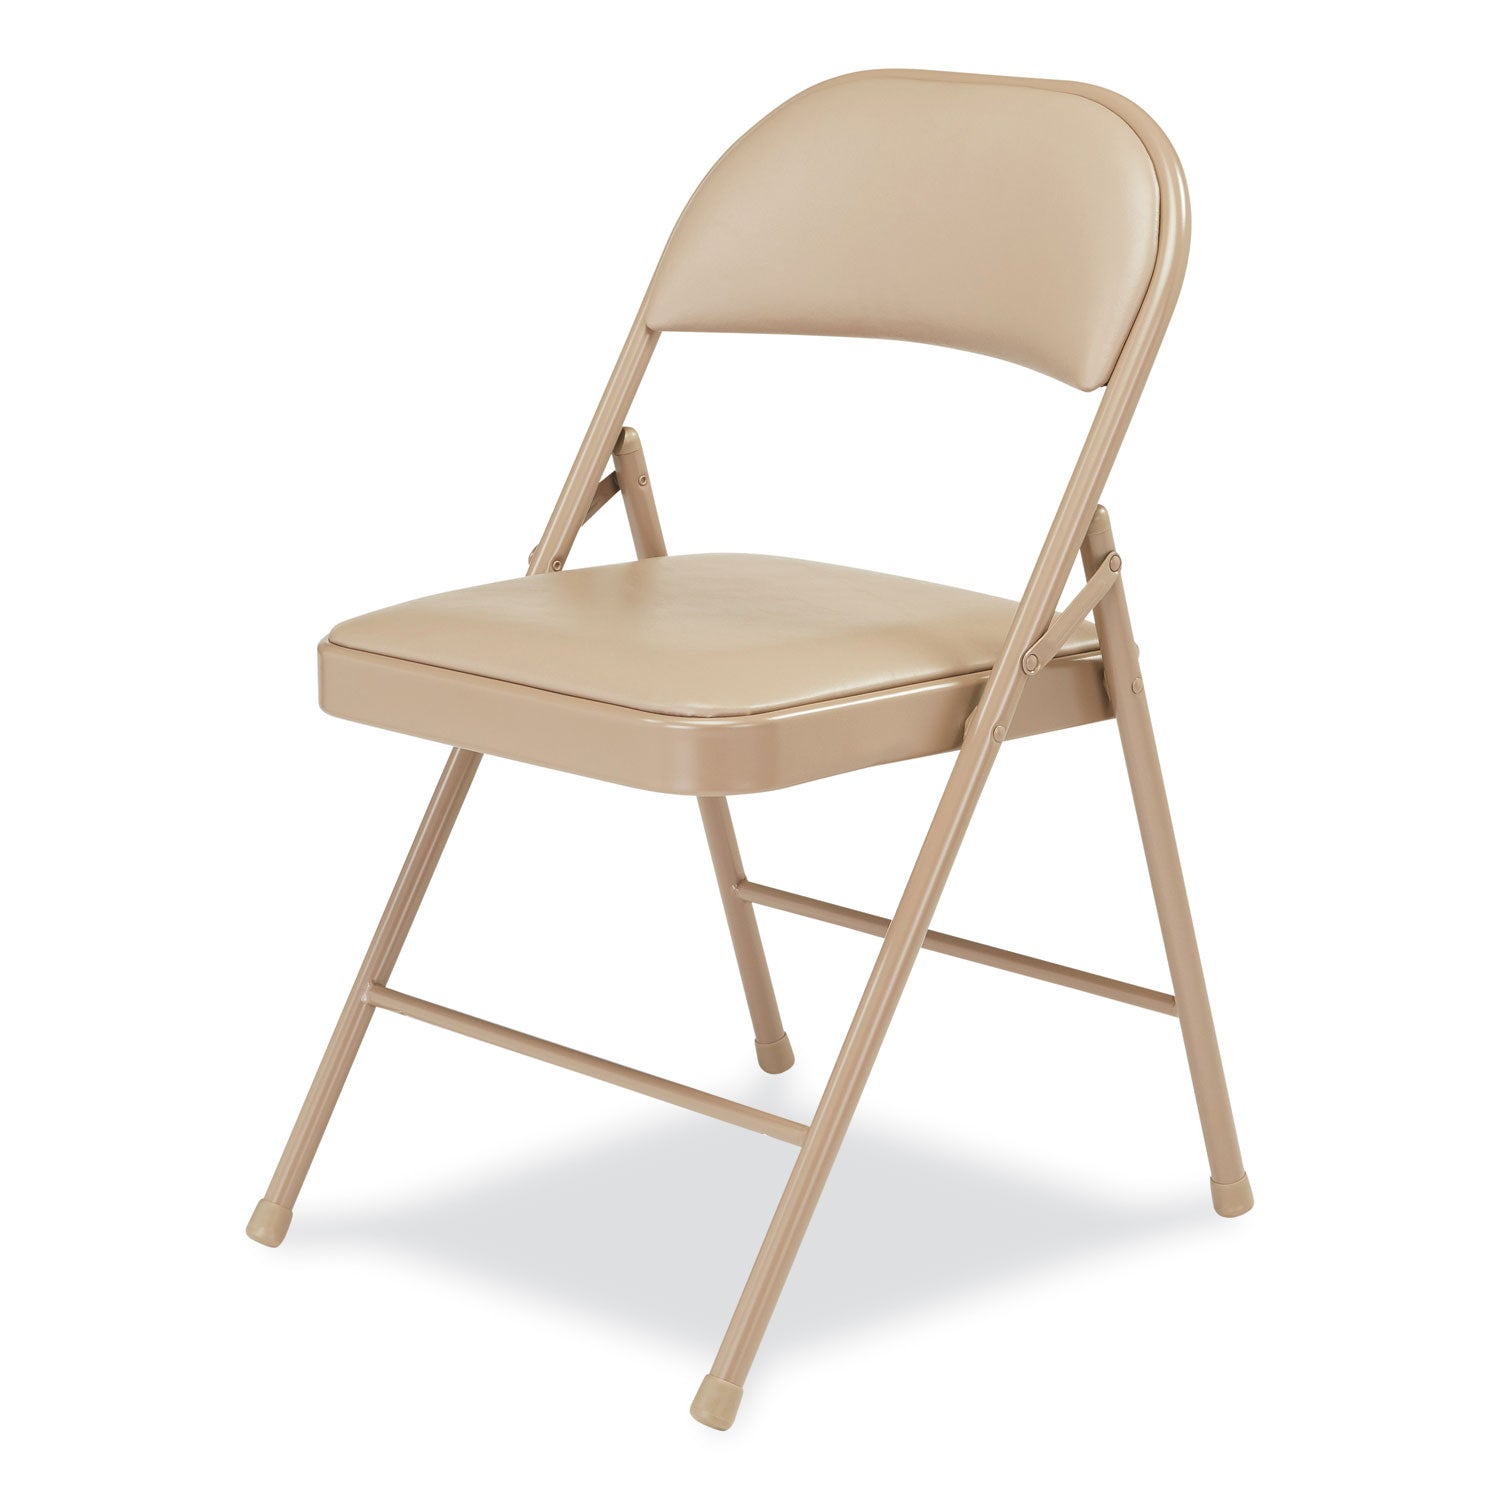 950-series-vinyl-padded-steel-folding-chair-supports-up-to-250-lb-1775-seat-height-beige-4-cartonships-in-1-3-bus-days_nps951 - 3